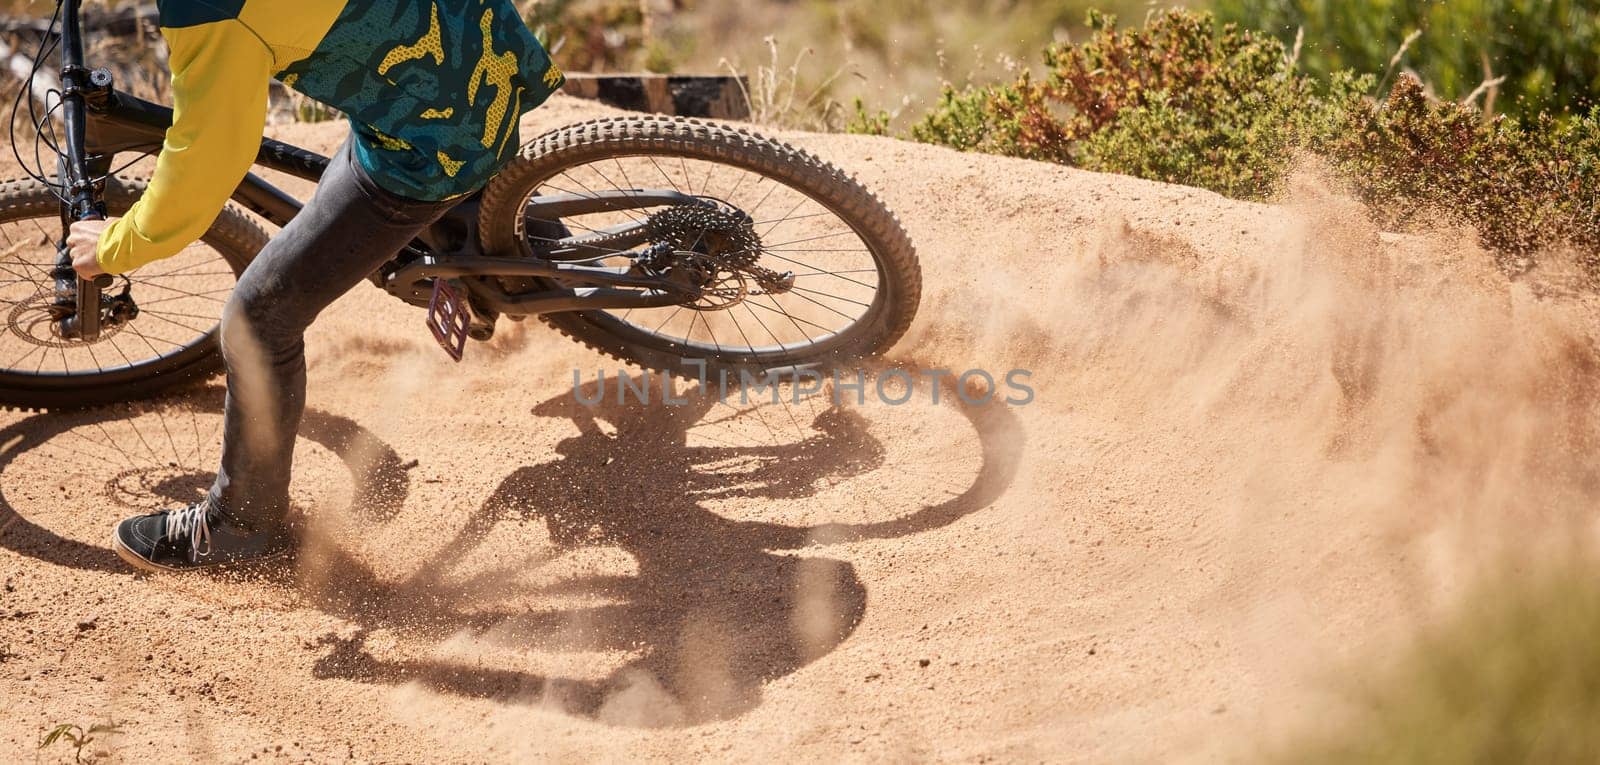 Dirt bike, dust and rider for sports workout in the mountain for fitness and active lifestyle. Bicycle, cyclist and cycling sportsman for fun adrenaline activity while biking in nature for adventure.